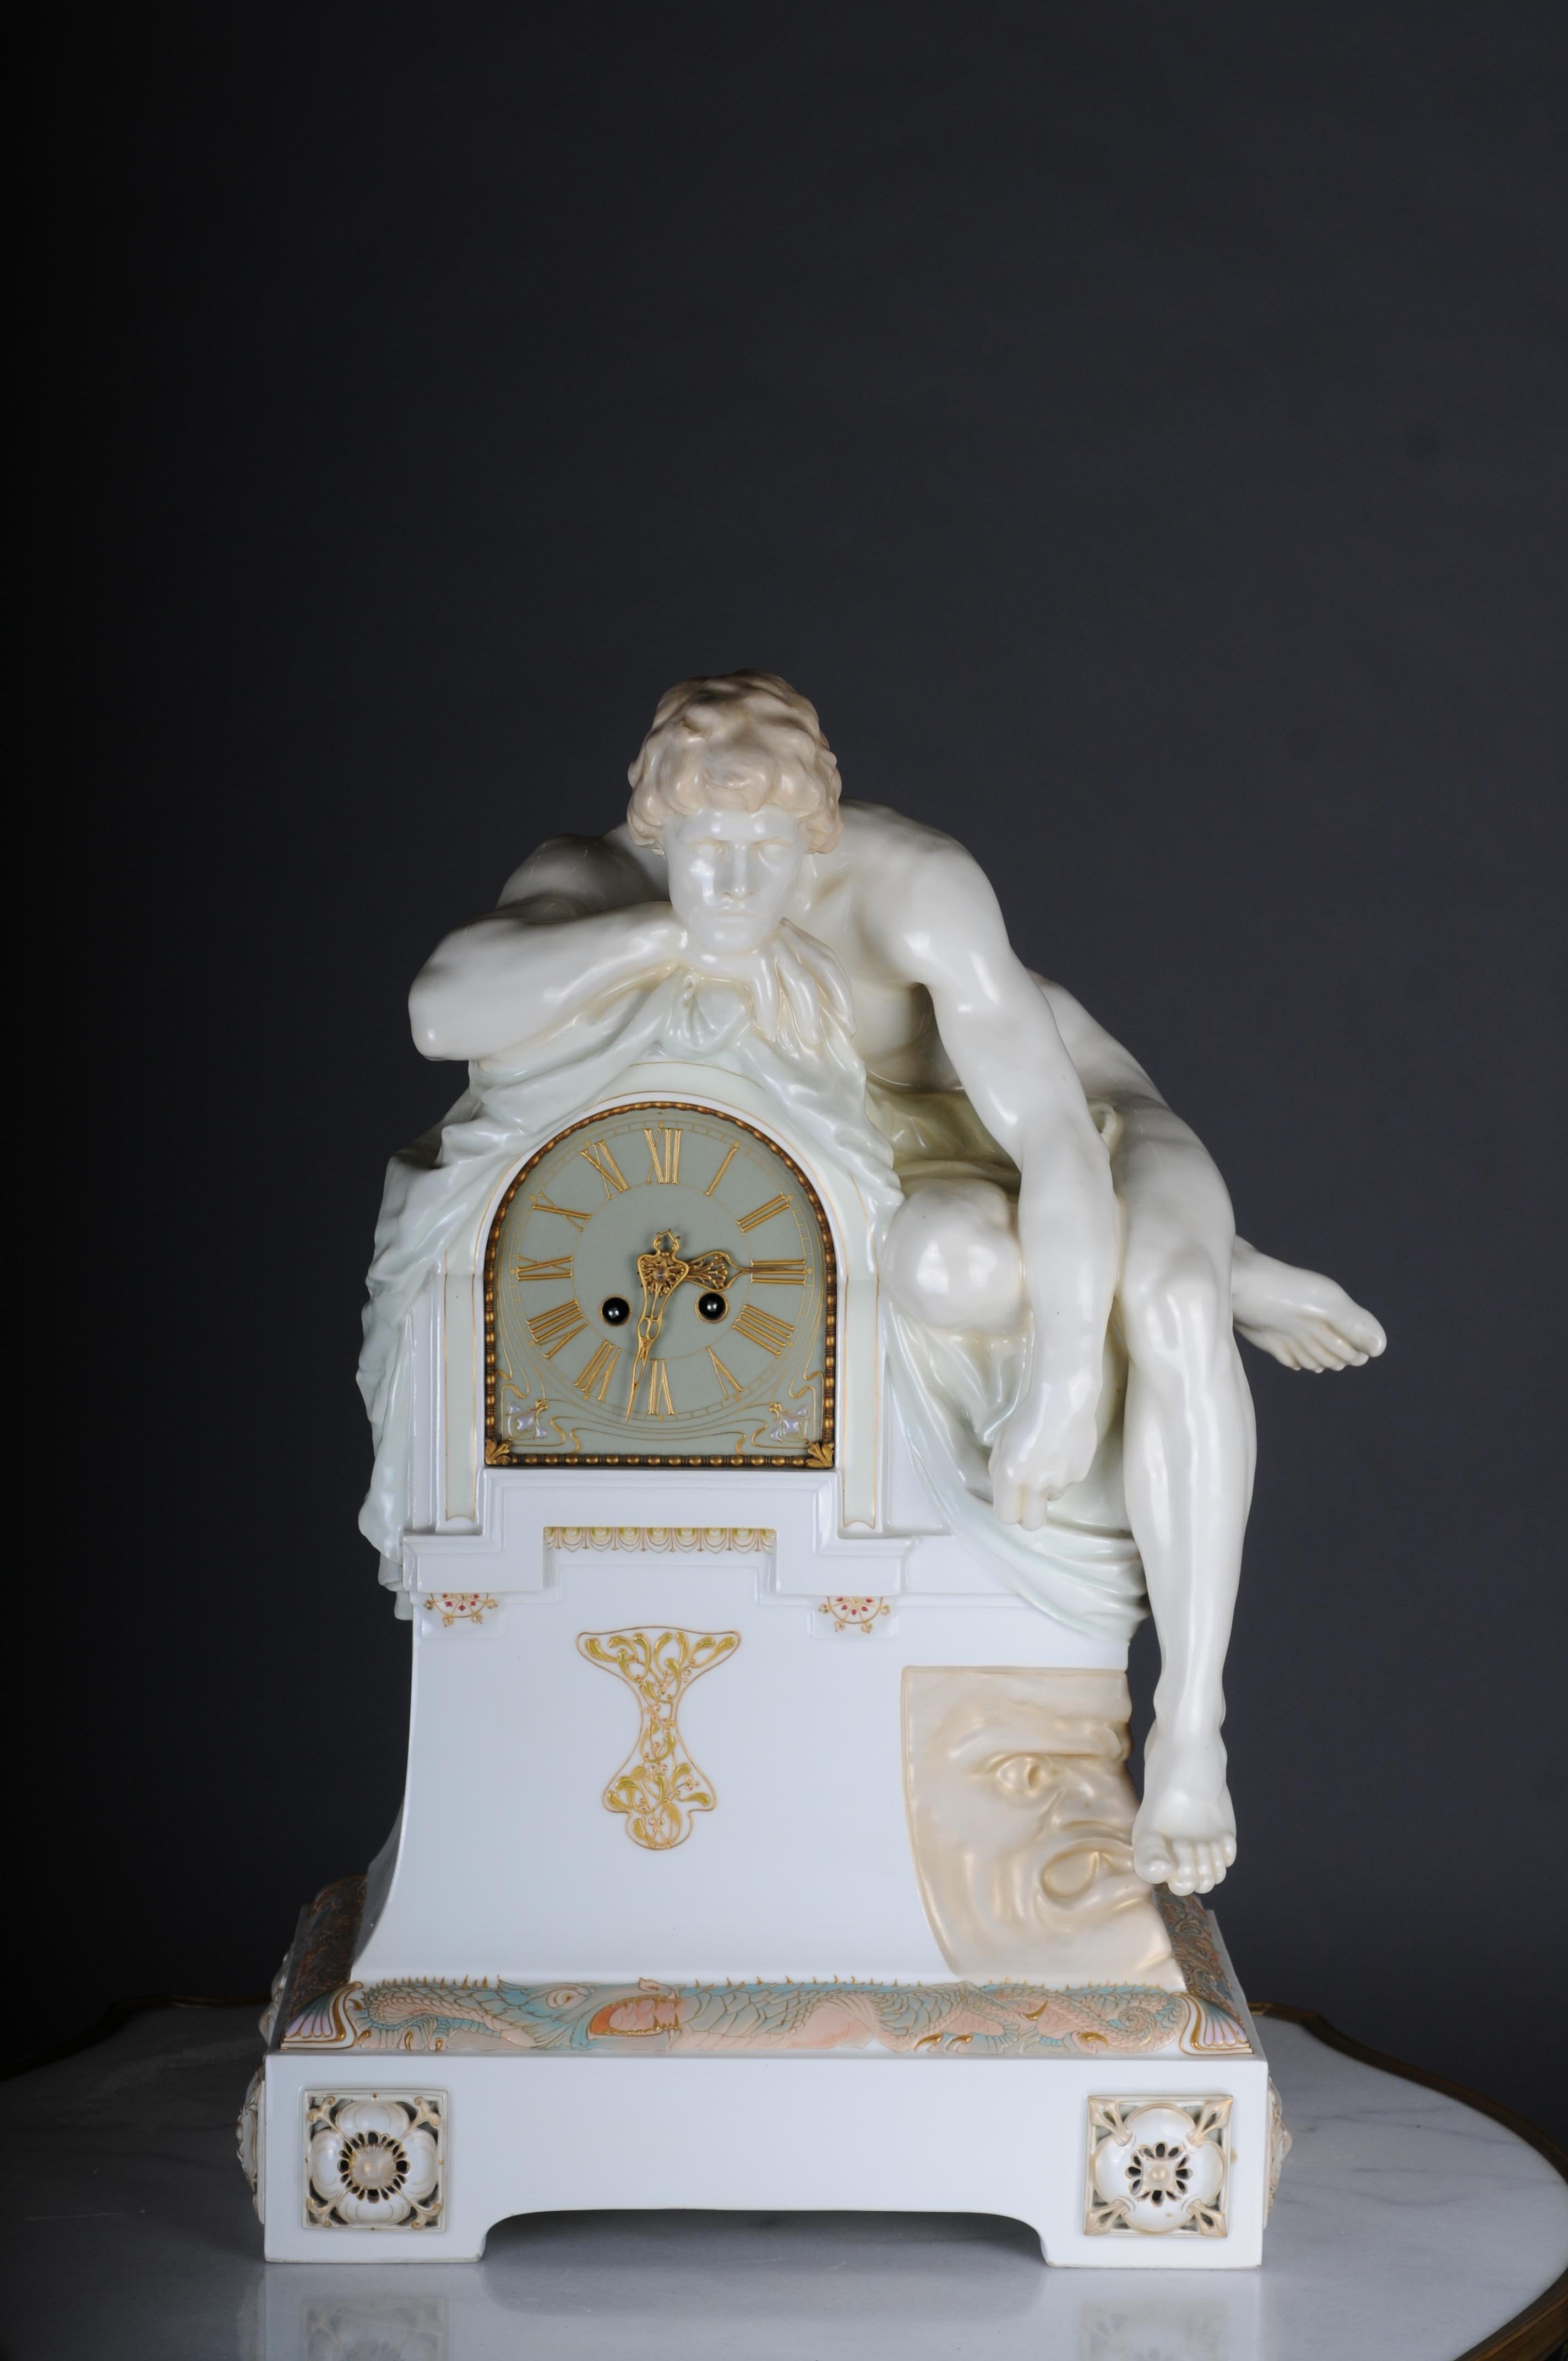 Monumental, impressive Art Nouveau mantel clock with enamel and soft painting. 60cm



KPM Berlin probably around 1904. Designer: Hugo Cauer. Body block swinging high from a rectangular base with a clockwork positioned at the top left, covered with